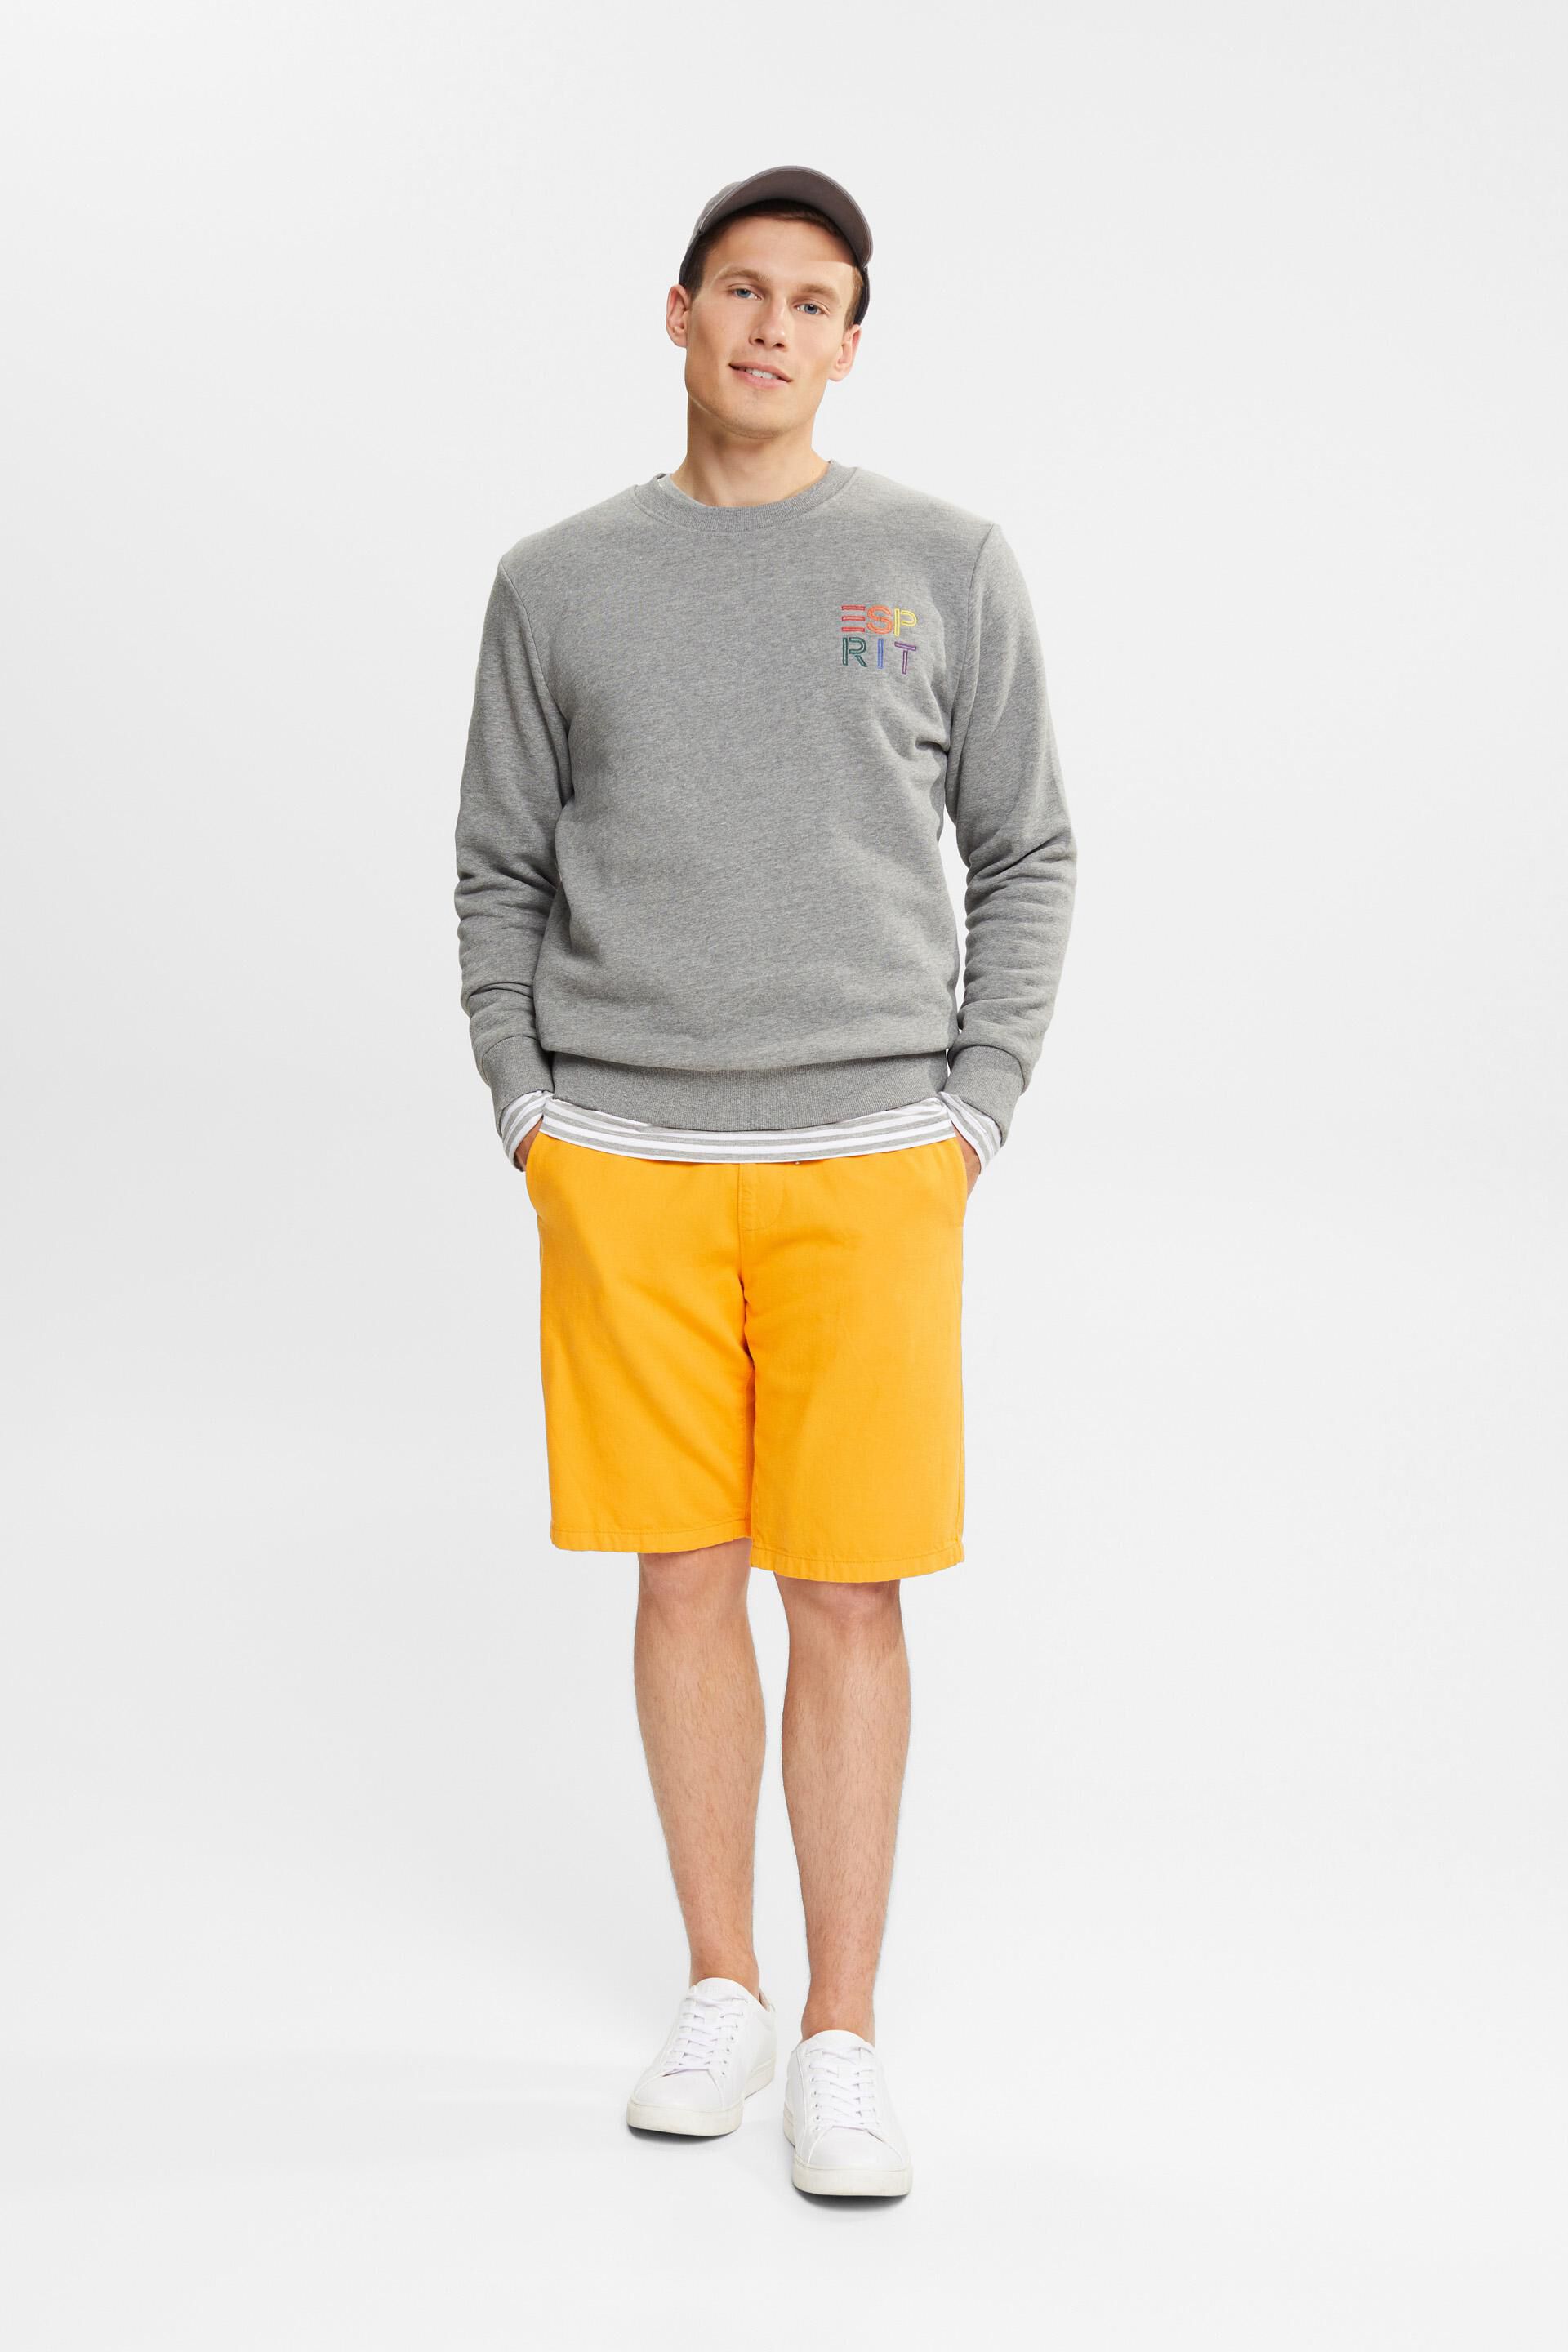 Esprit Sweatshirt a with embroidered colourful logo